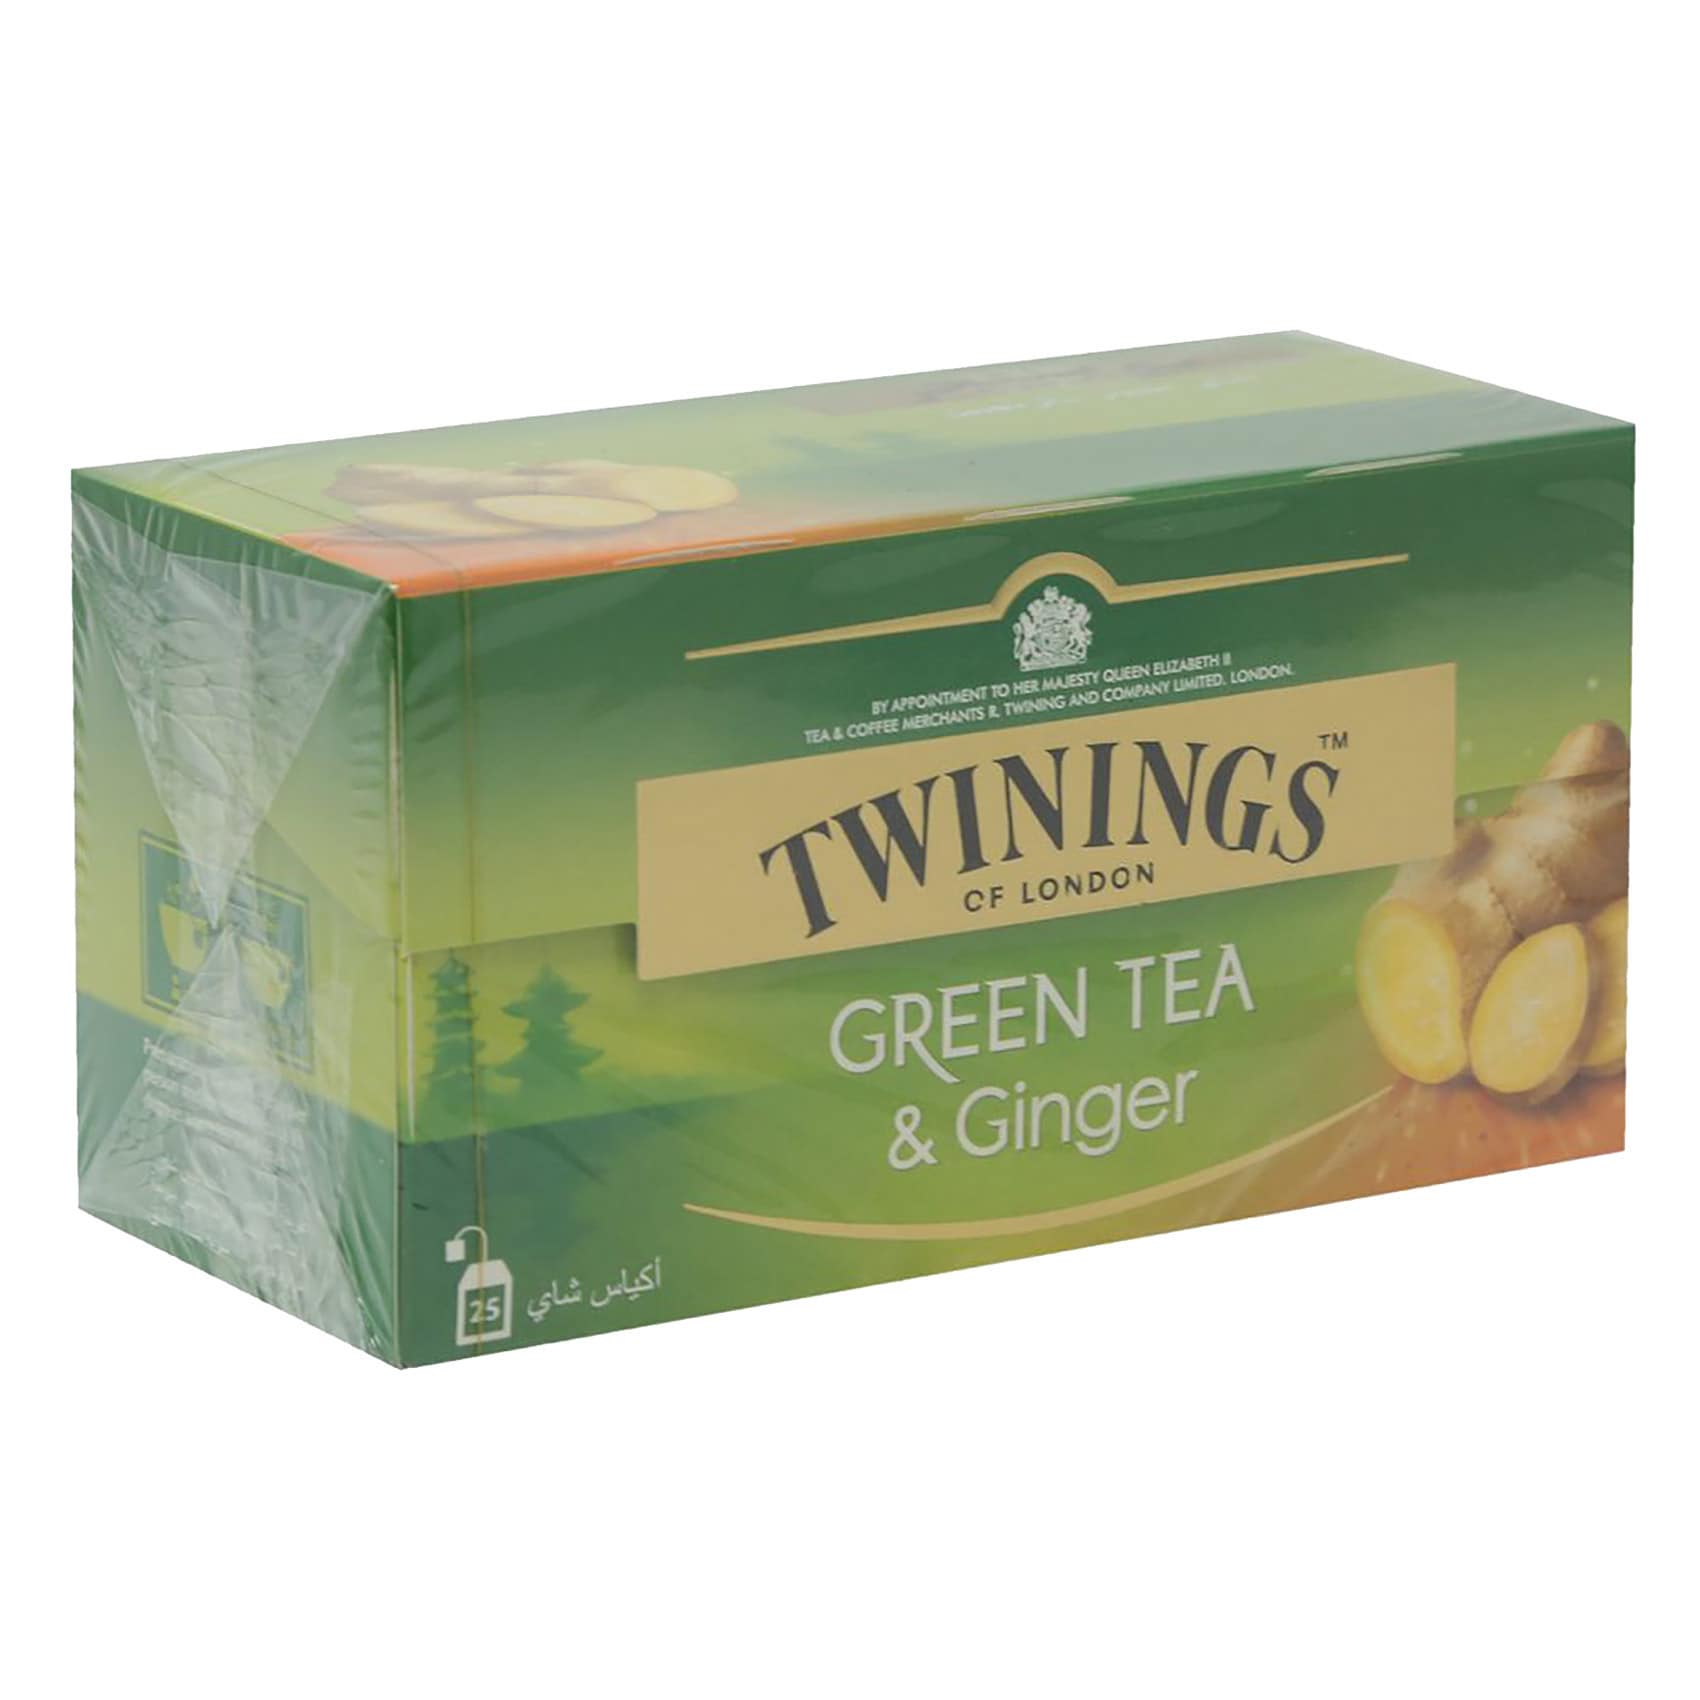 Buy Twinings Green Tea And Ginger 1.6g x 25 bags Online - Shop ...